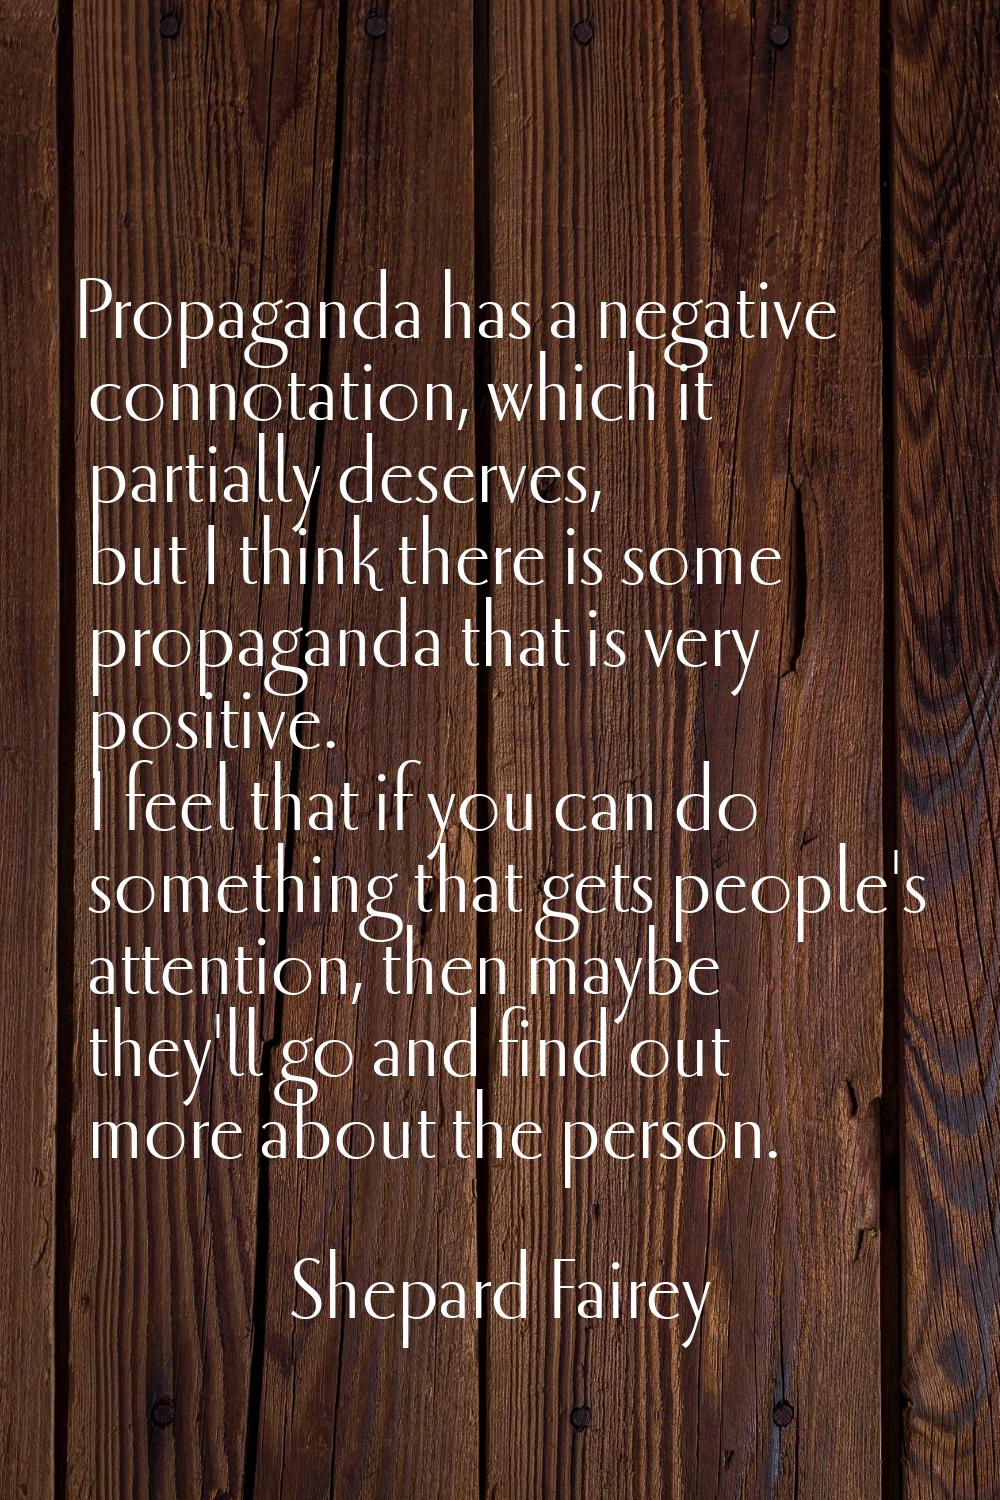 Propaganda has a negative connotation, which it partially deserves, but I think there is some propa